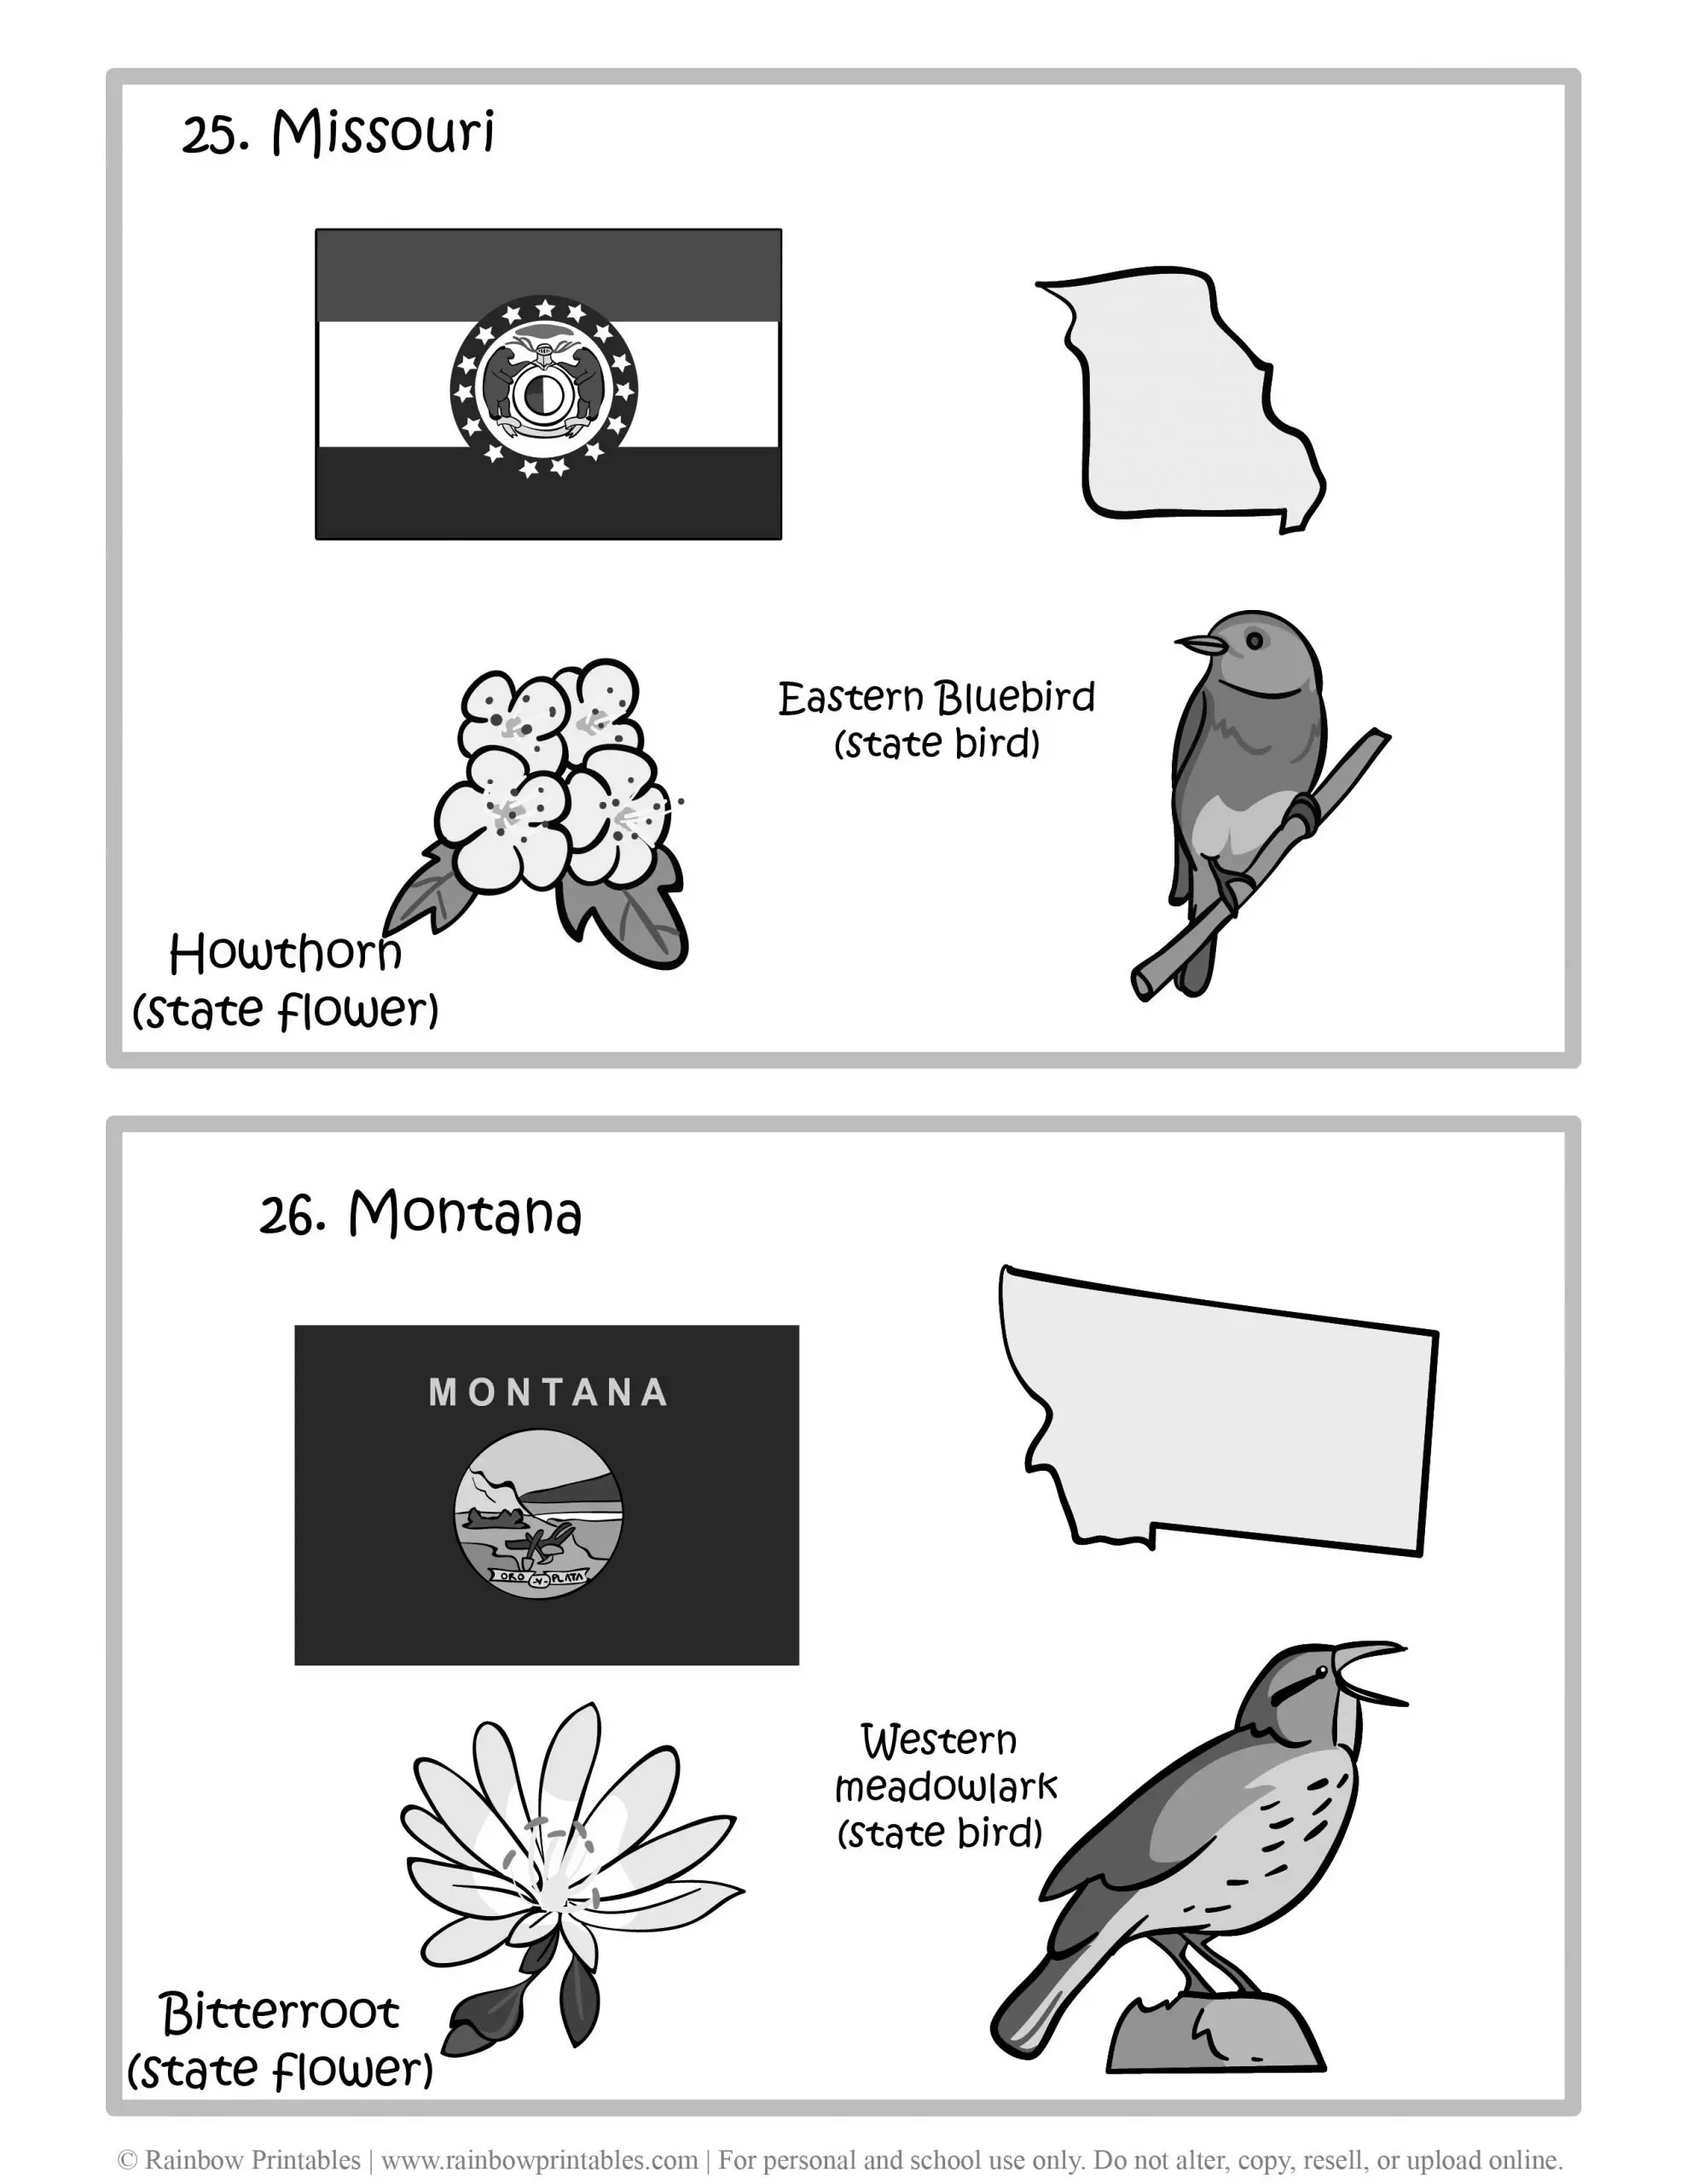 Missouri, Montana, 50 US State Flag, State Bird, State Flower, United States of America - American States Geography Worksheet Class Lesson Printables Flashcards Black White